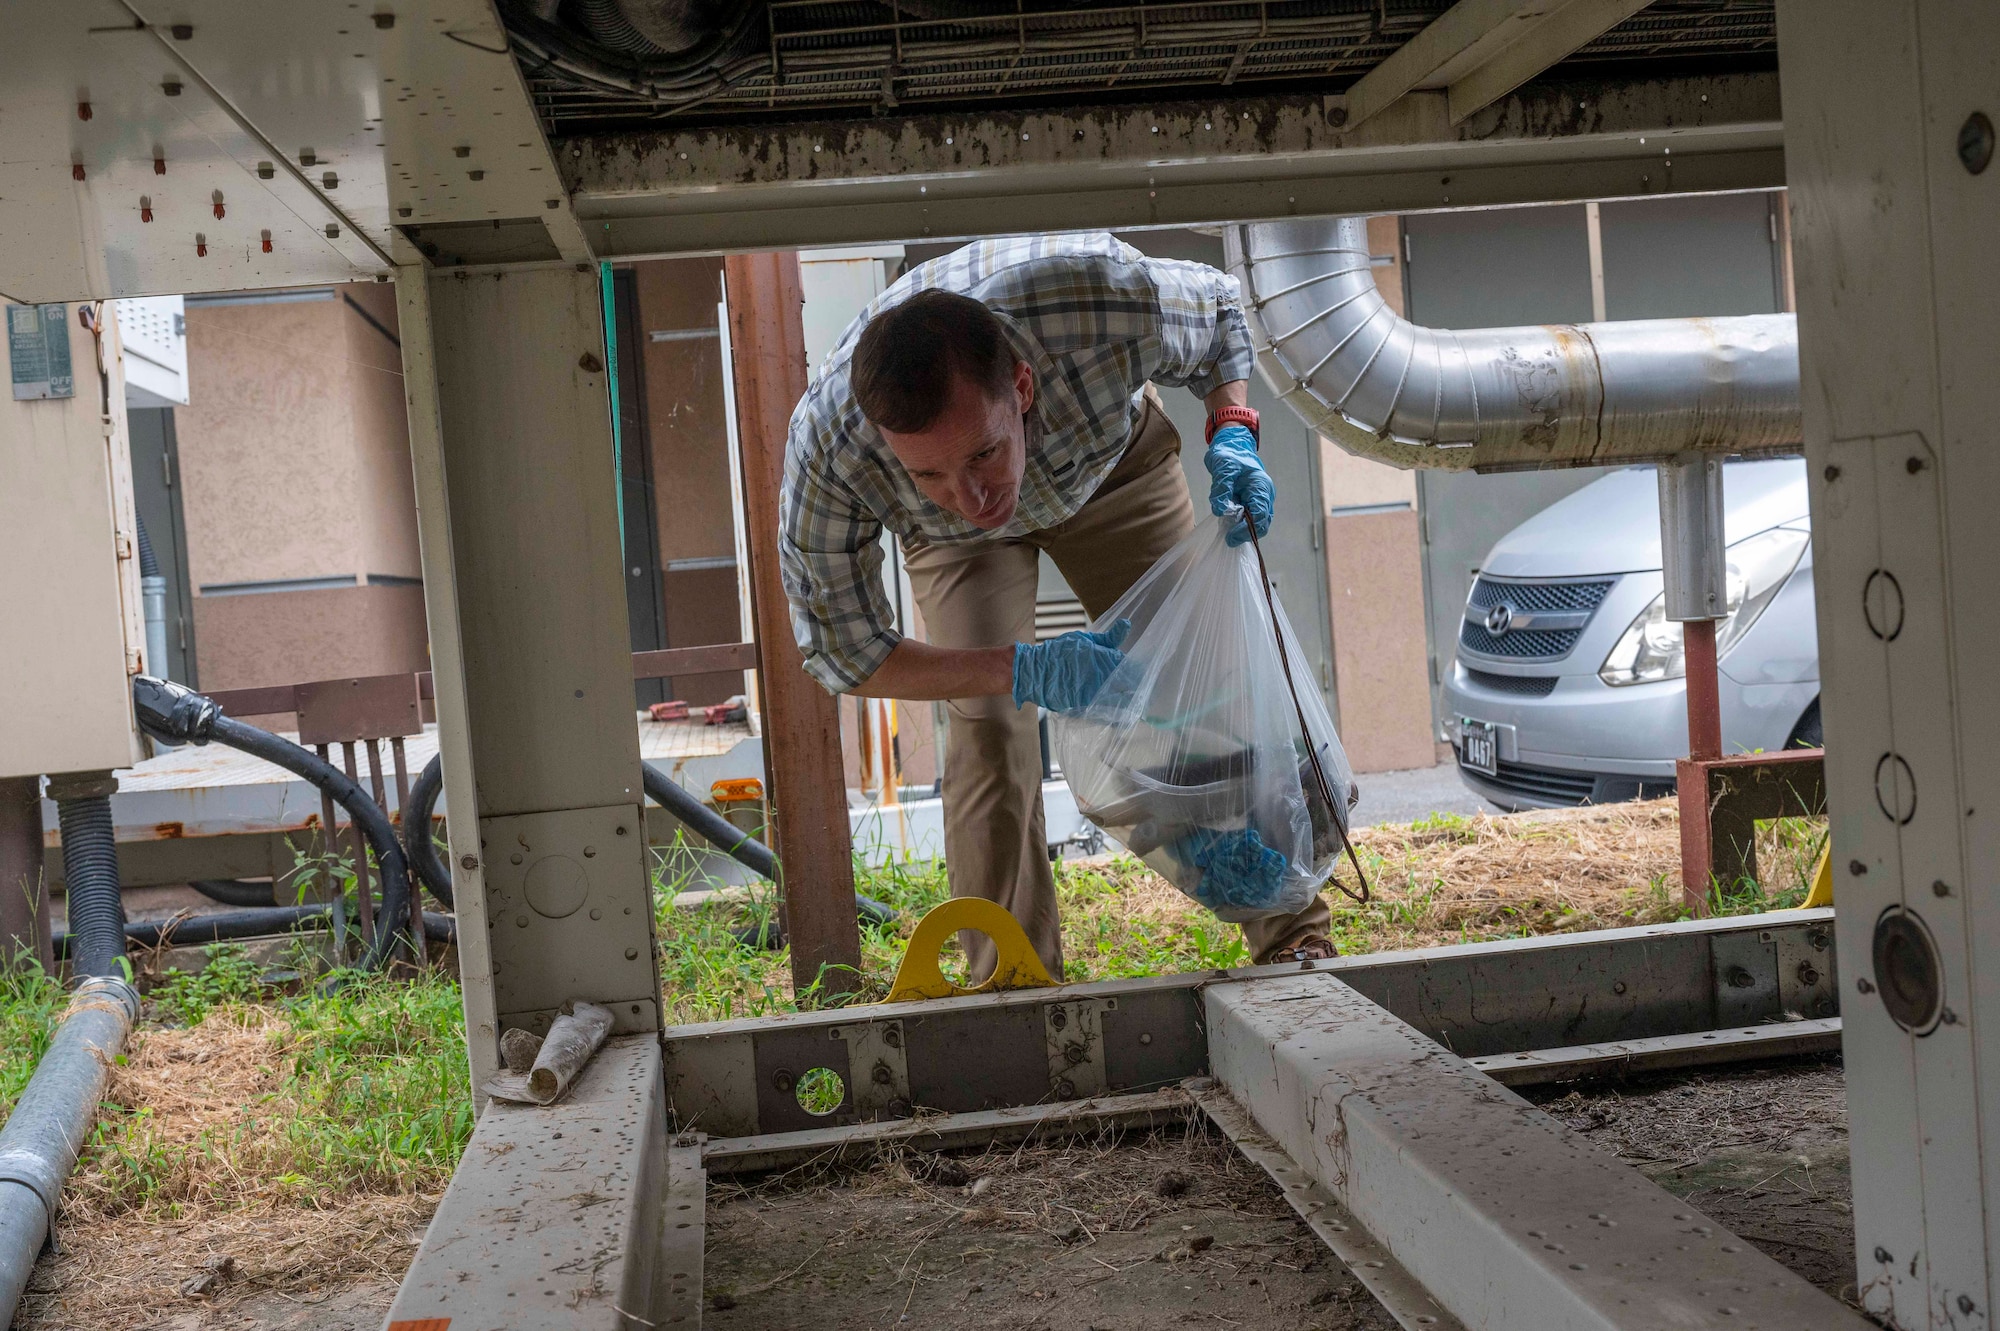 Bradley Carroll, 51st Comptroller Squadron deputy comptroller, picks up trash during a base clean up at Osan Air Base, Republic of Korea, Sept. 13, 2023. Across the base, Airmen and civilians combined efforts to pick up trash, recyclables and debris to maintain environmental standards and invest in the base's infrastructure. (U.S. Air Force photo by Senior Airman Aaron Edwards)